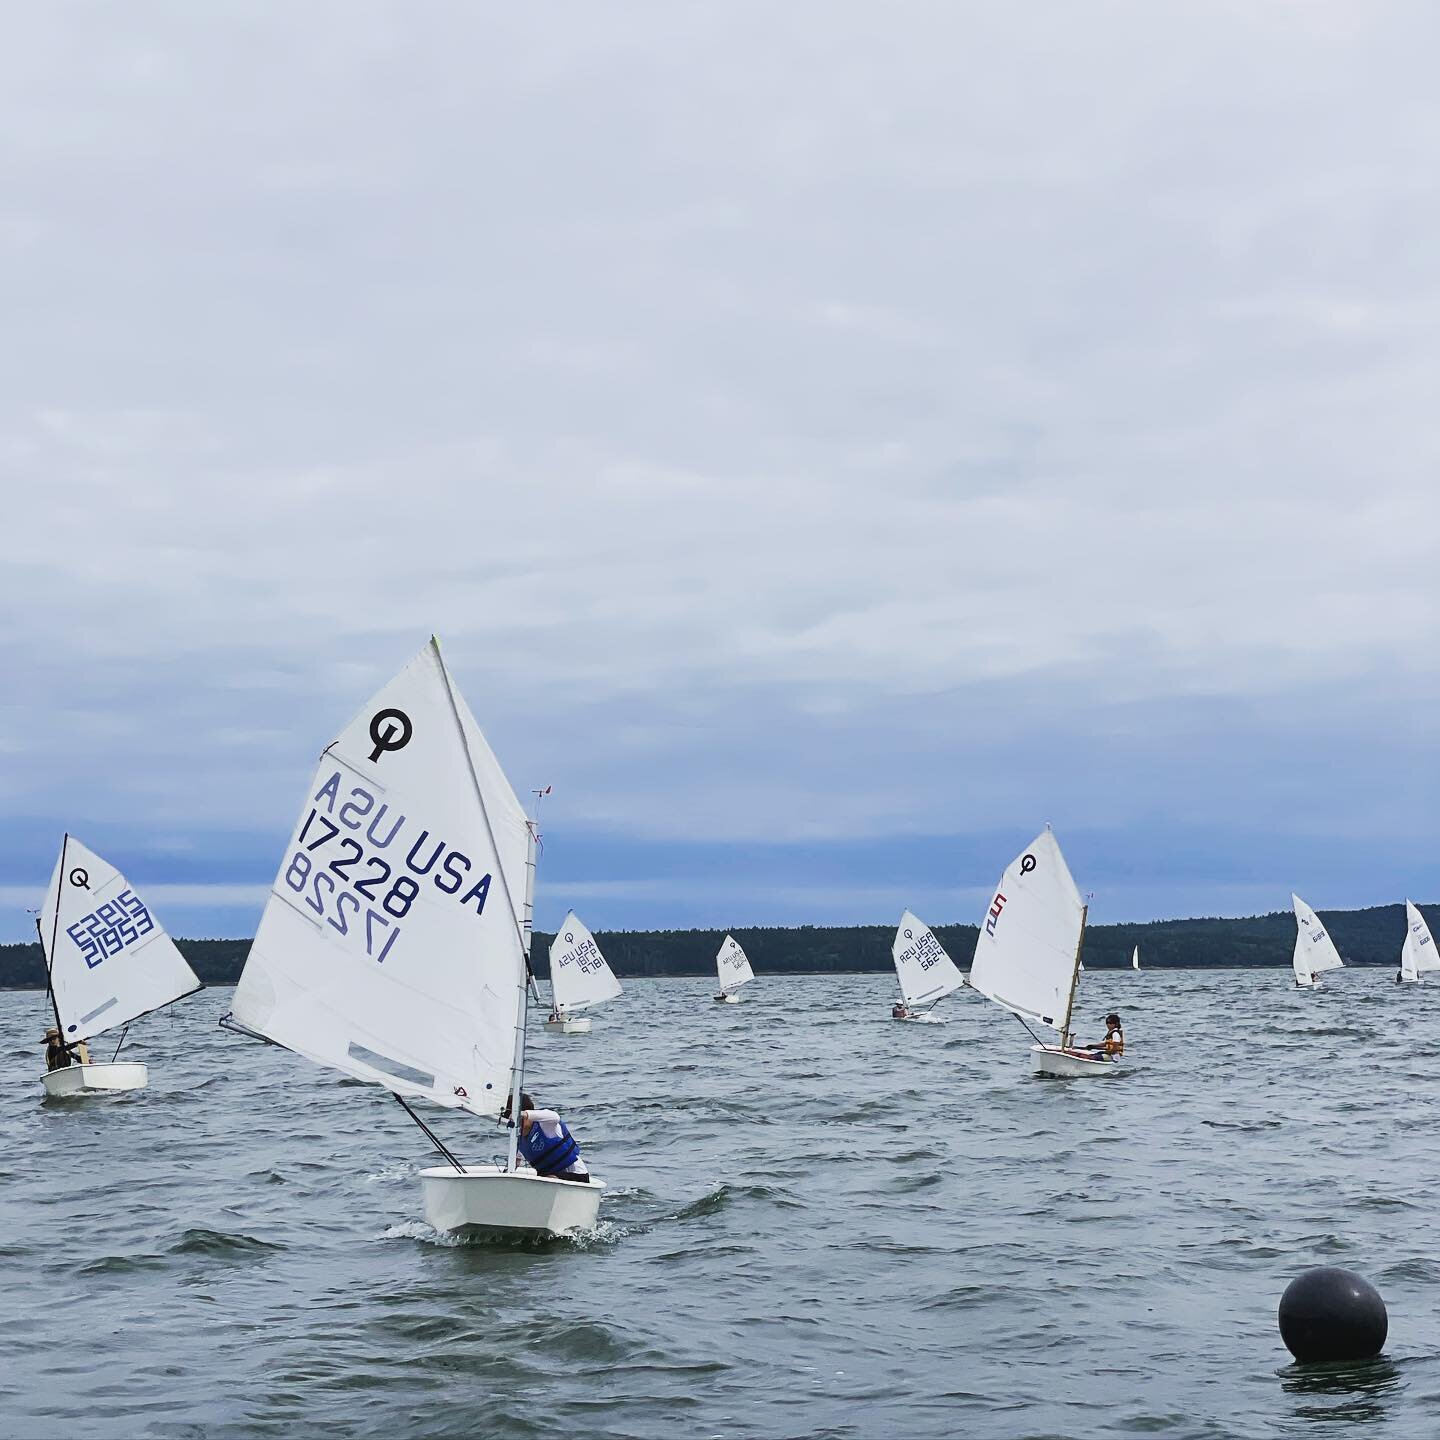 The Optis are Coming! Session 1 starts June 19. Join us! ⛵️🔥 Link to registration in bio. #kidswhosail #optisailing #ksea #summer2023